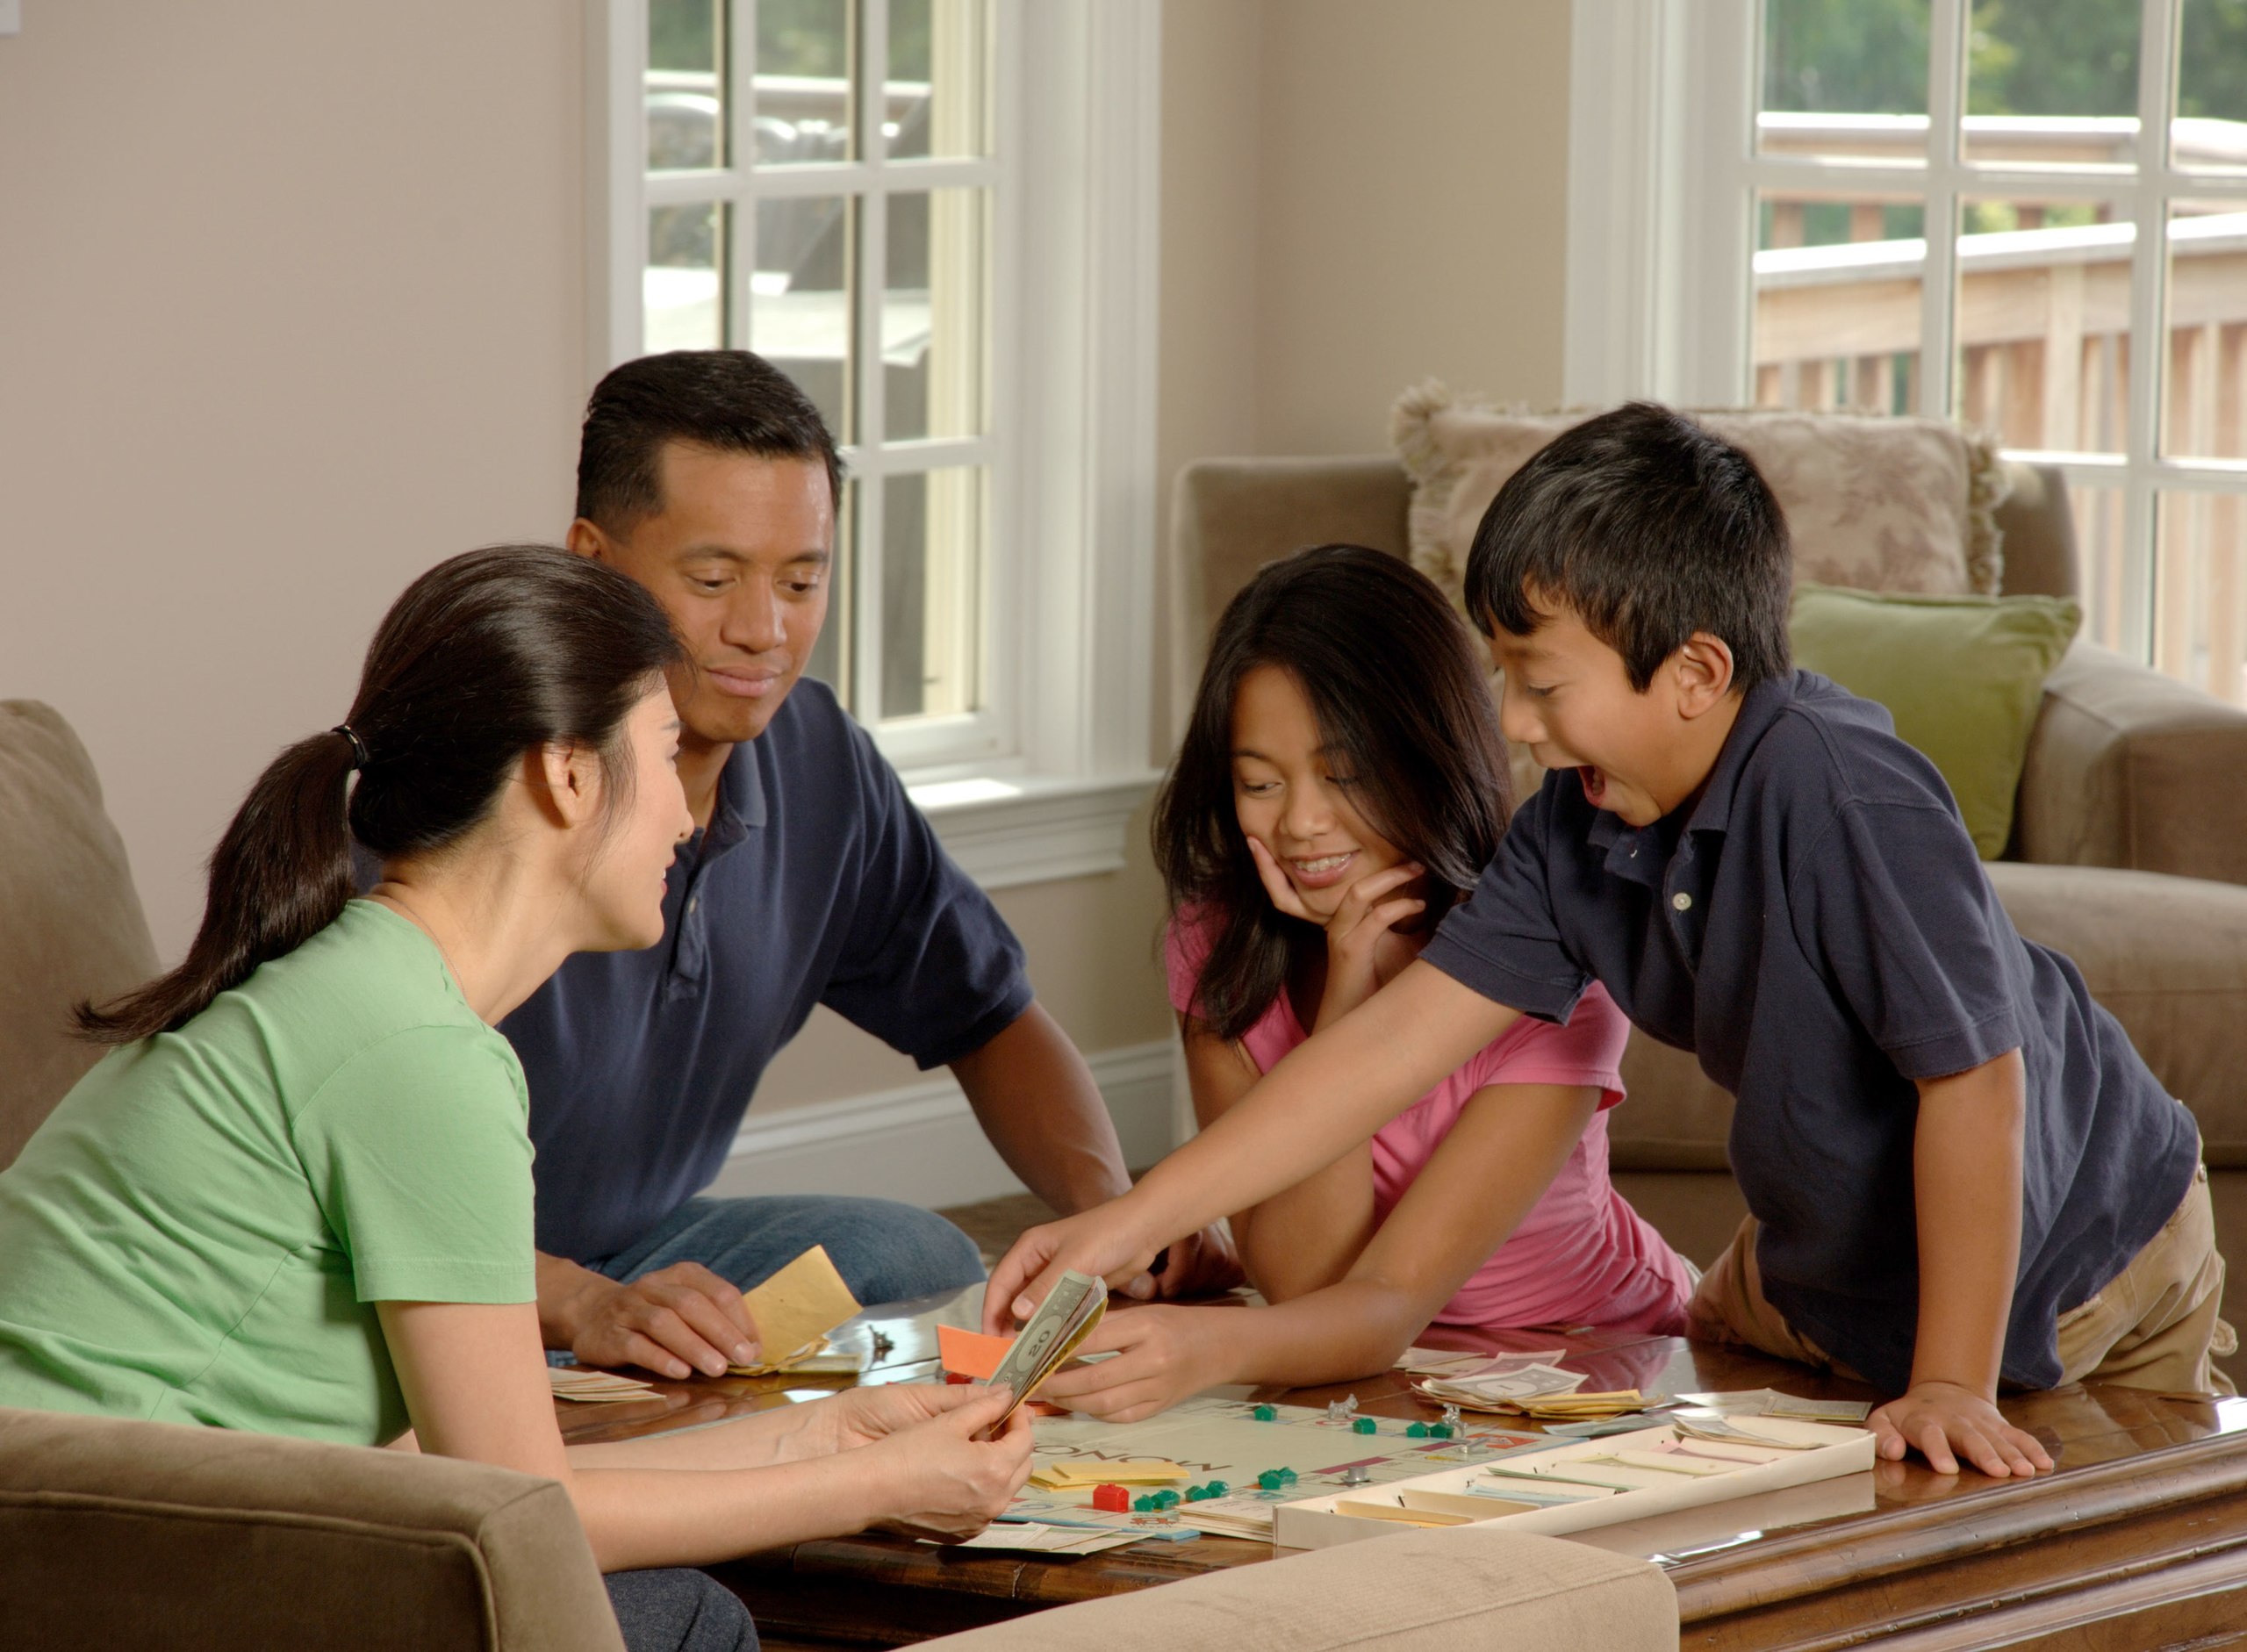 A family sitting together playing board games